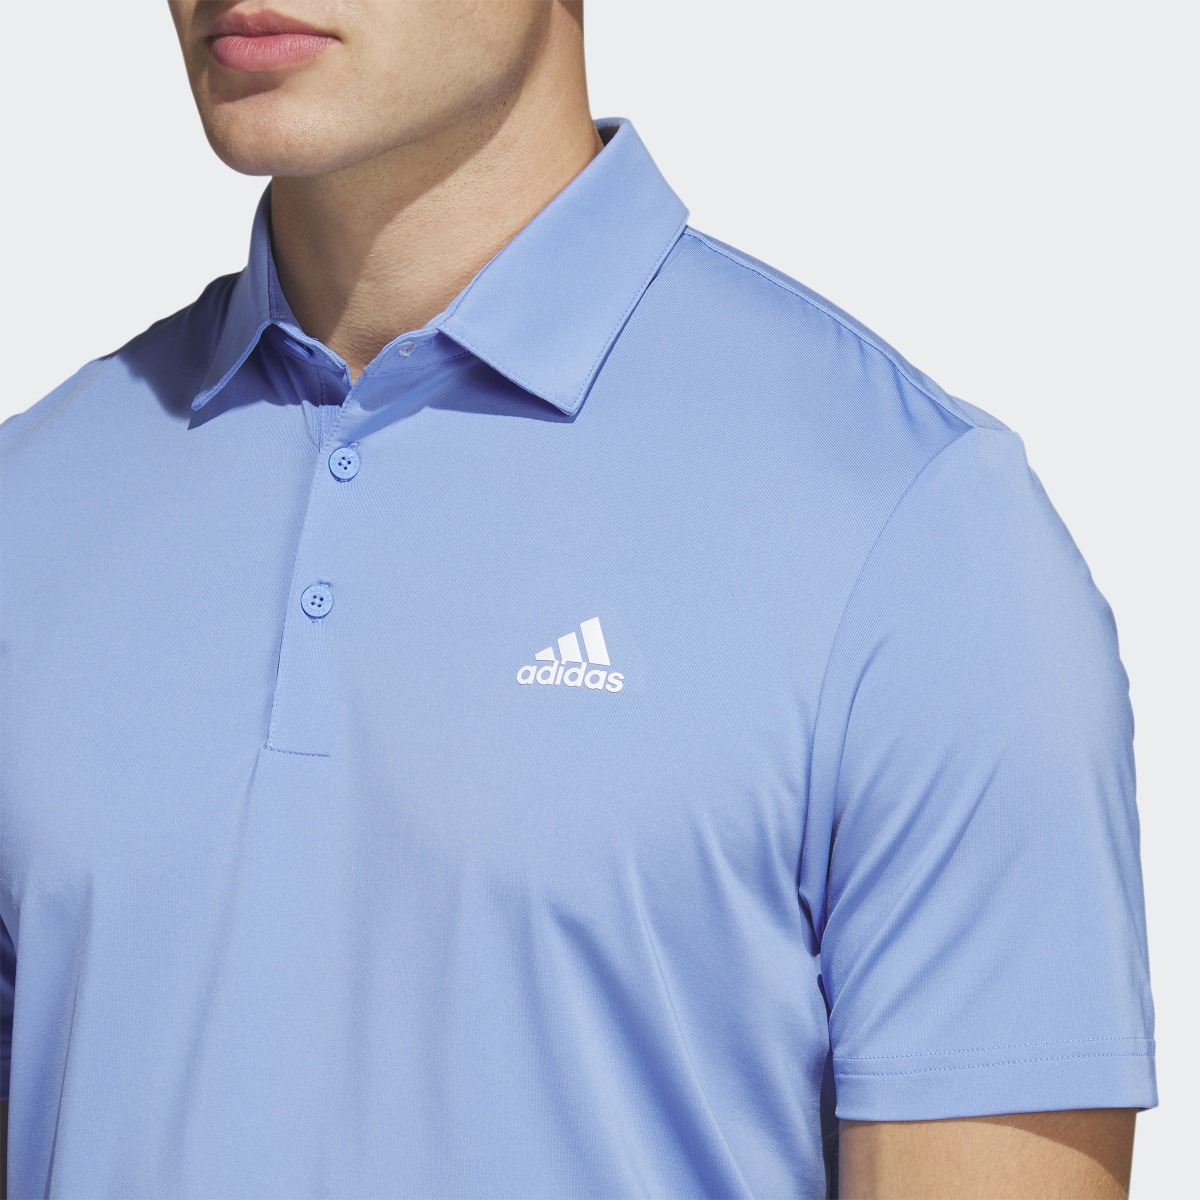 Adidas Ultimate365 Solid Left Chest Poloshirt. 6